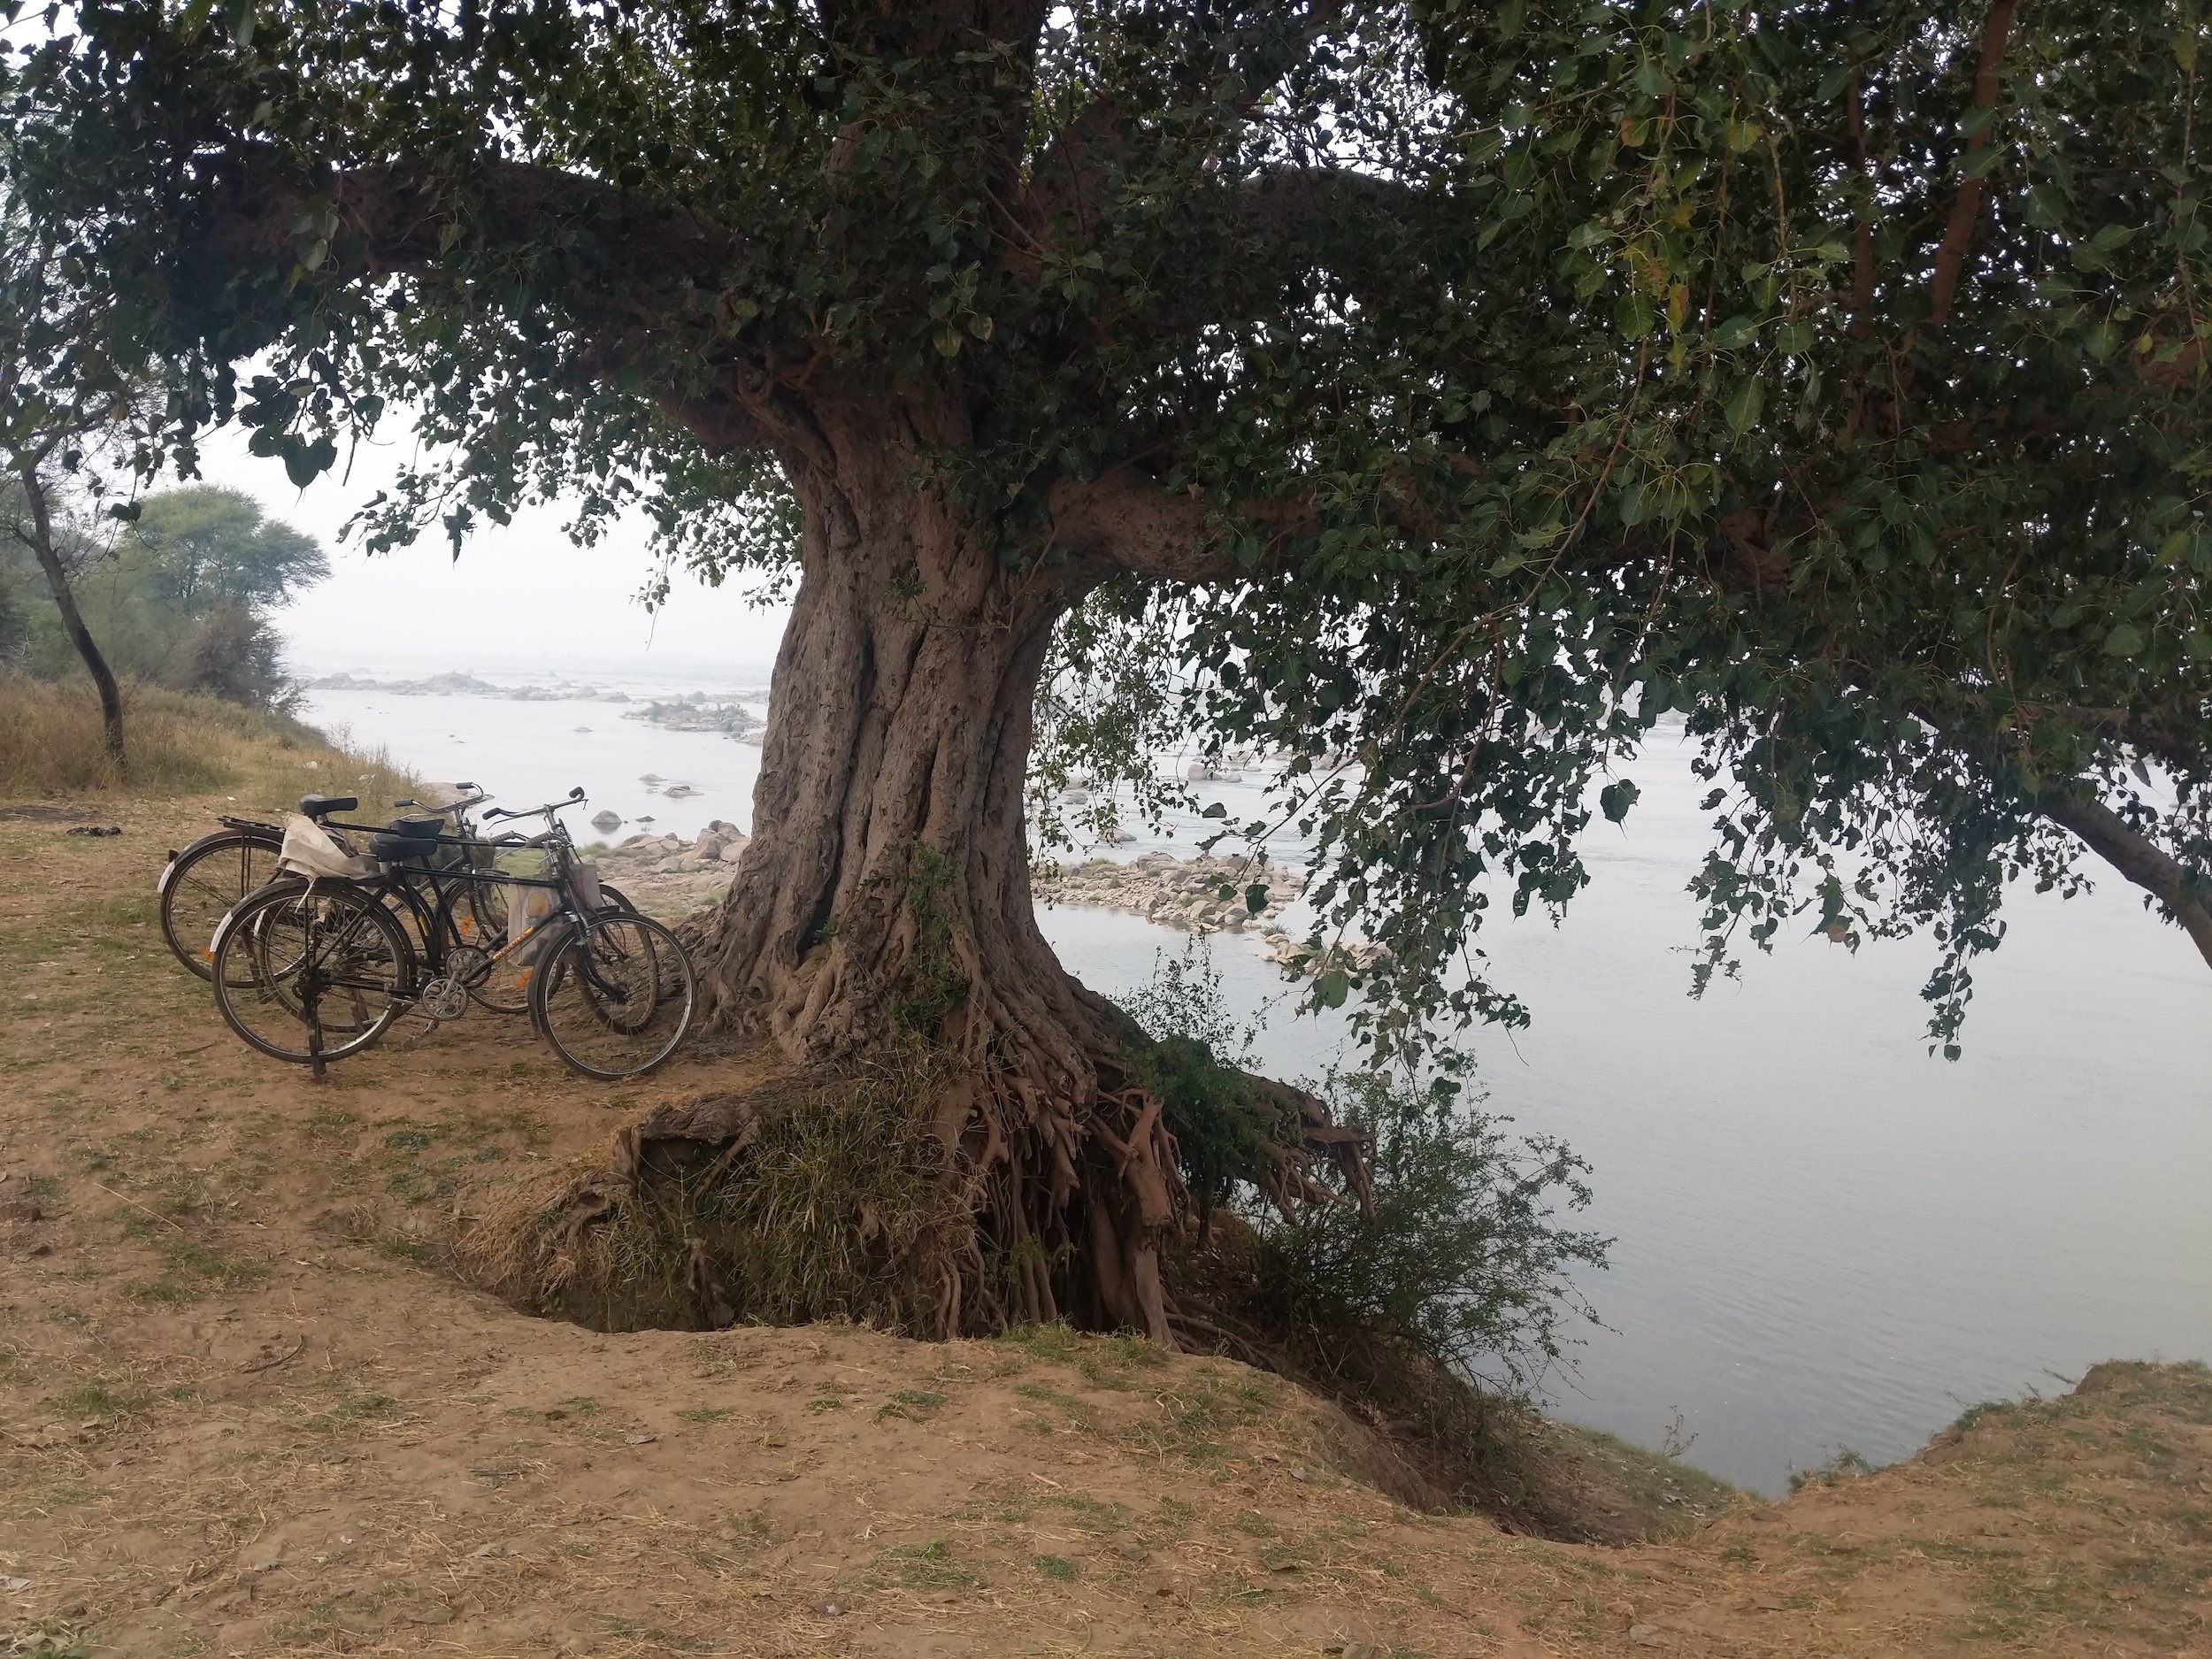 Erosion by the Betwa river endangers a tree